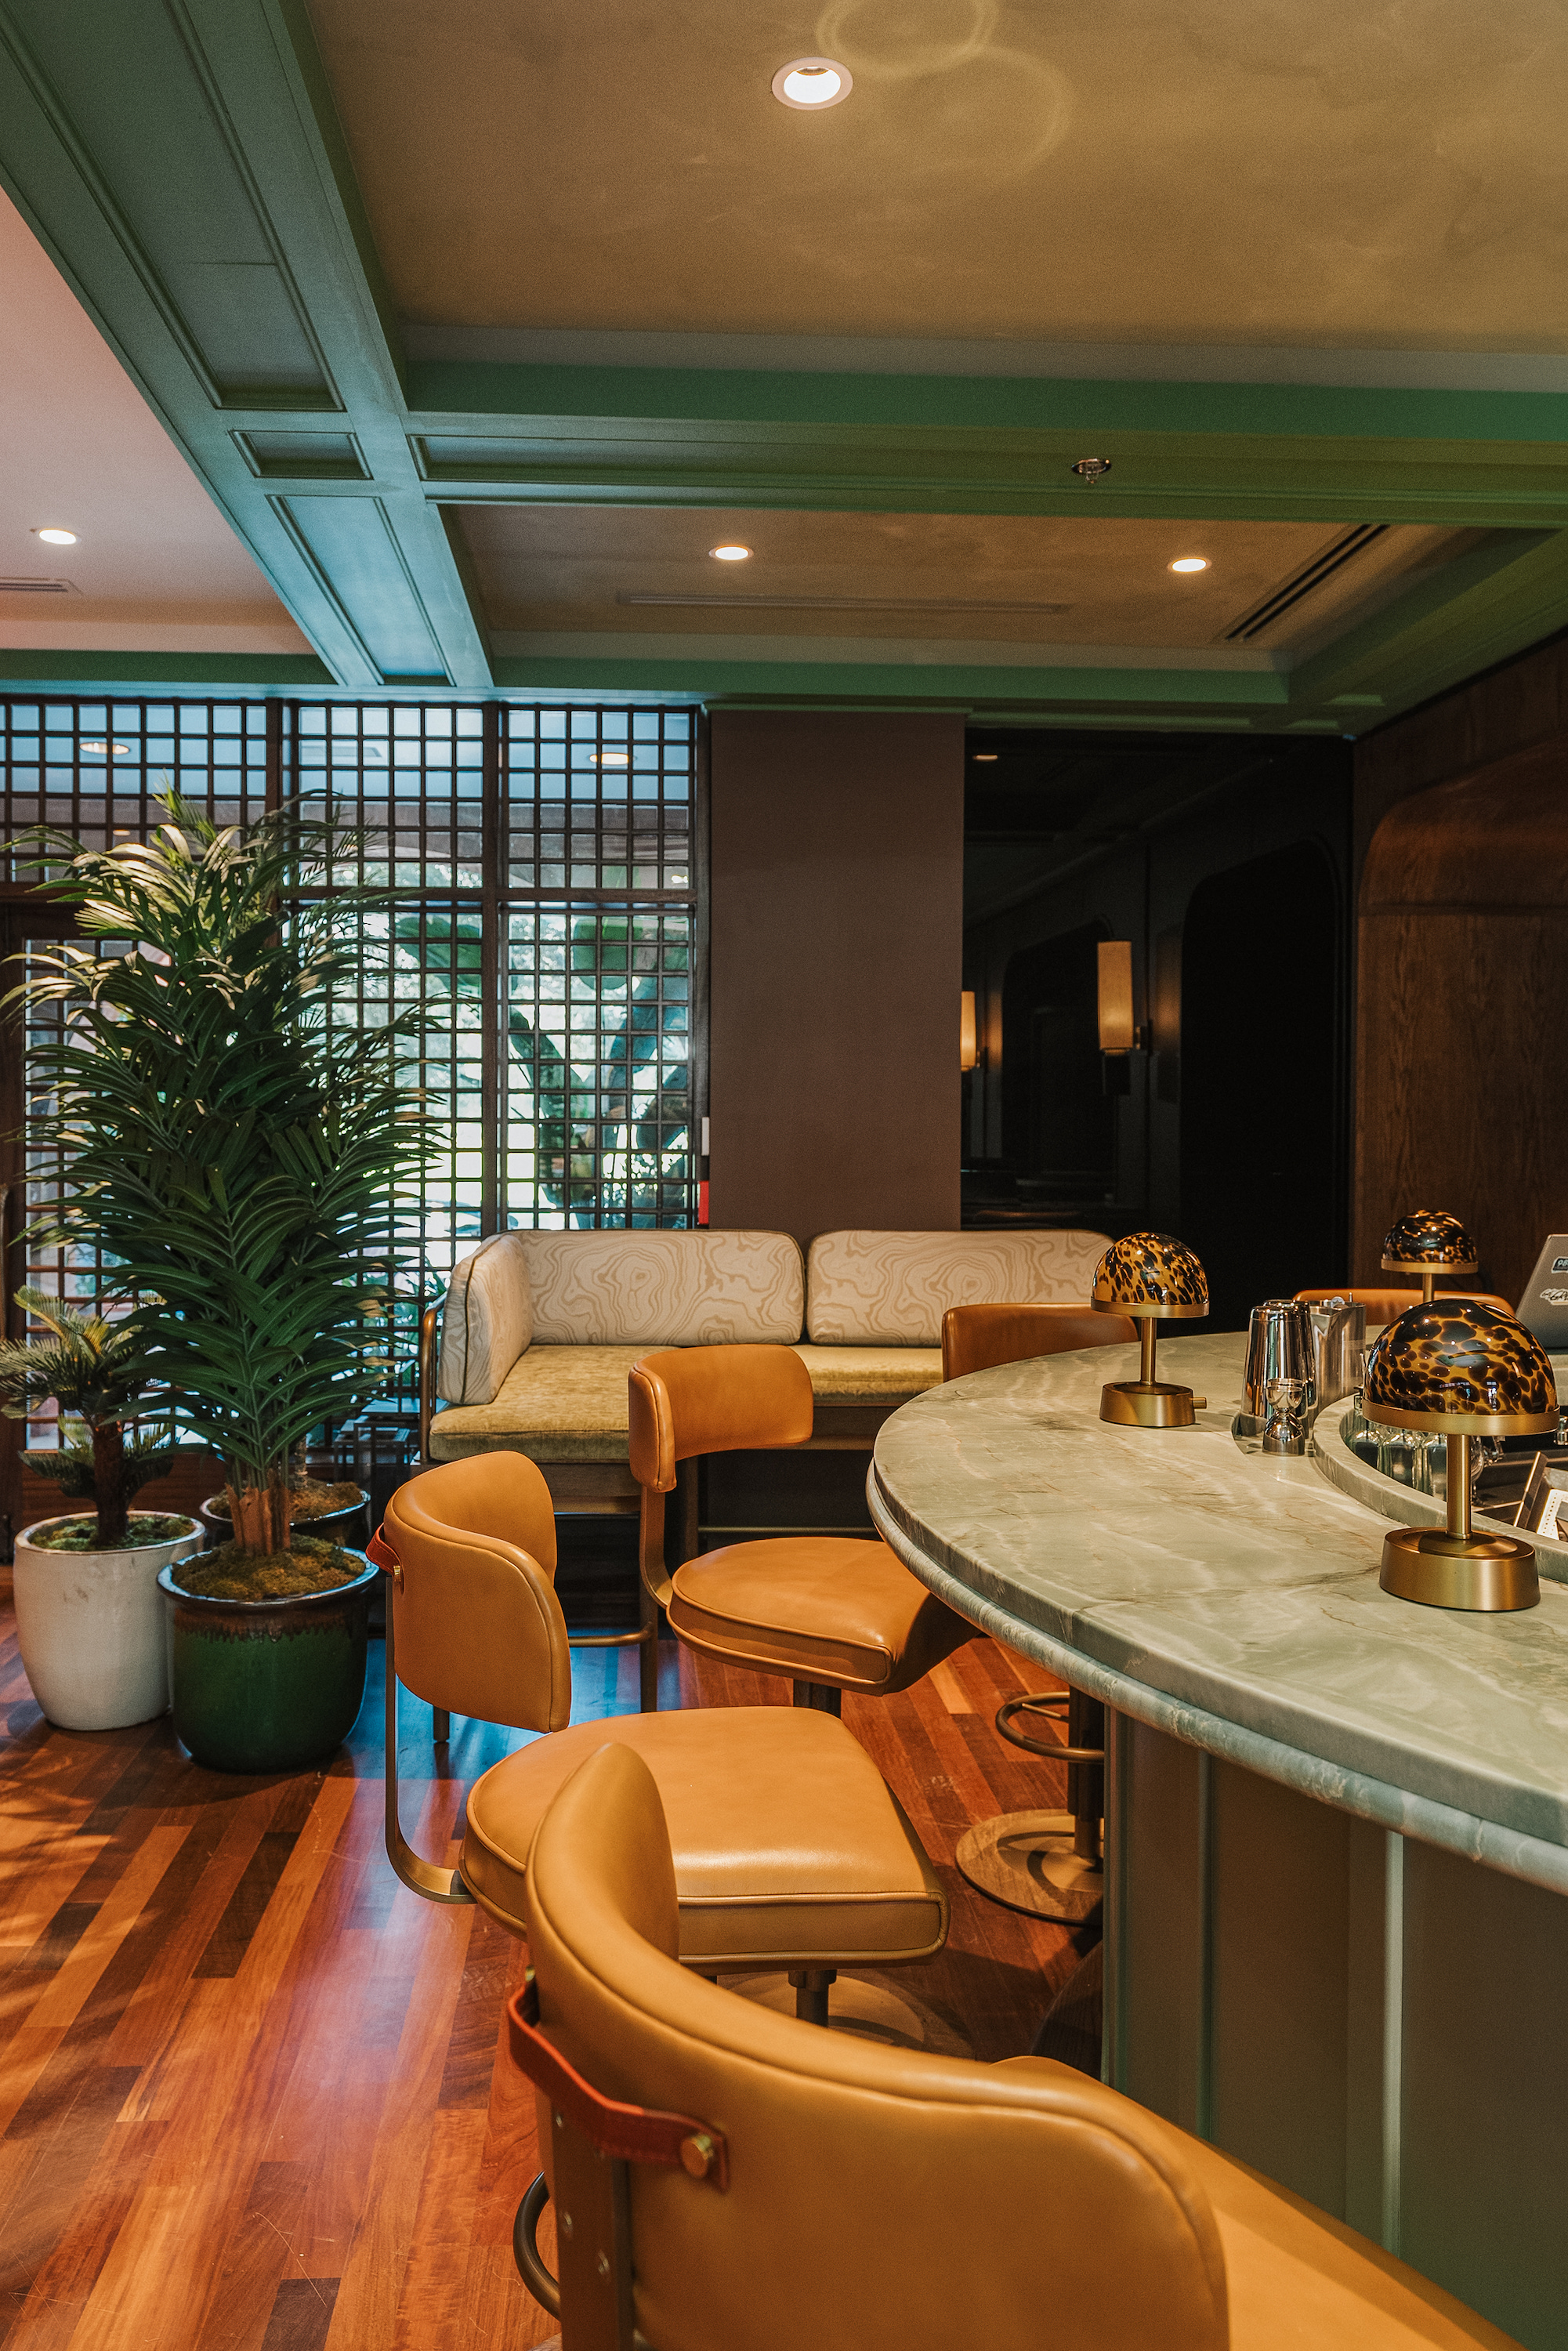 The circle-shaped bar of the Green Room, which nods to midcentury-modern design, is a dimly lit lounge with upholstered banquettes in slate and sage tones and handsome leather bar seats.